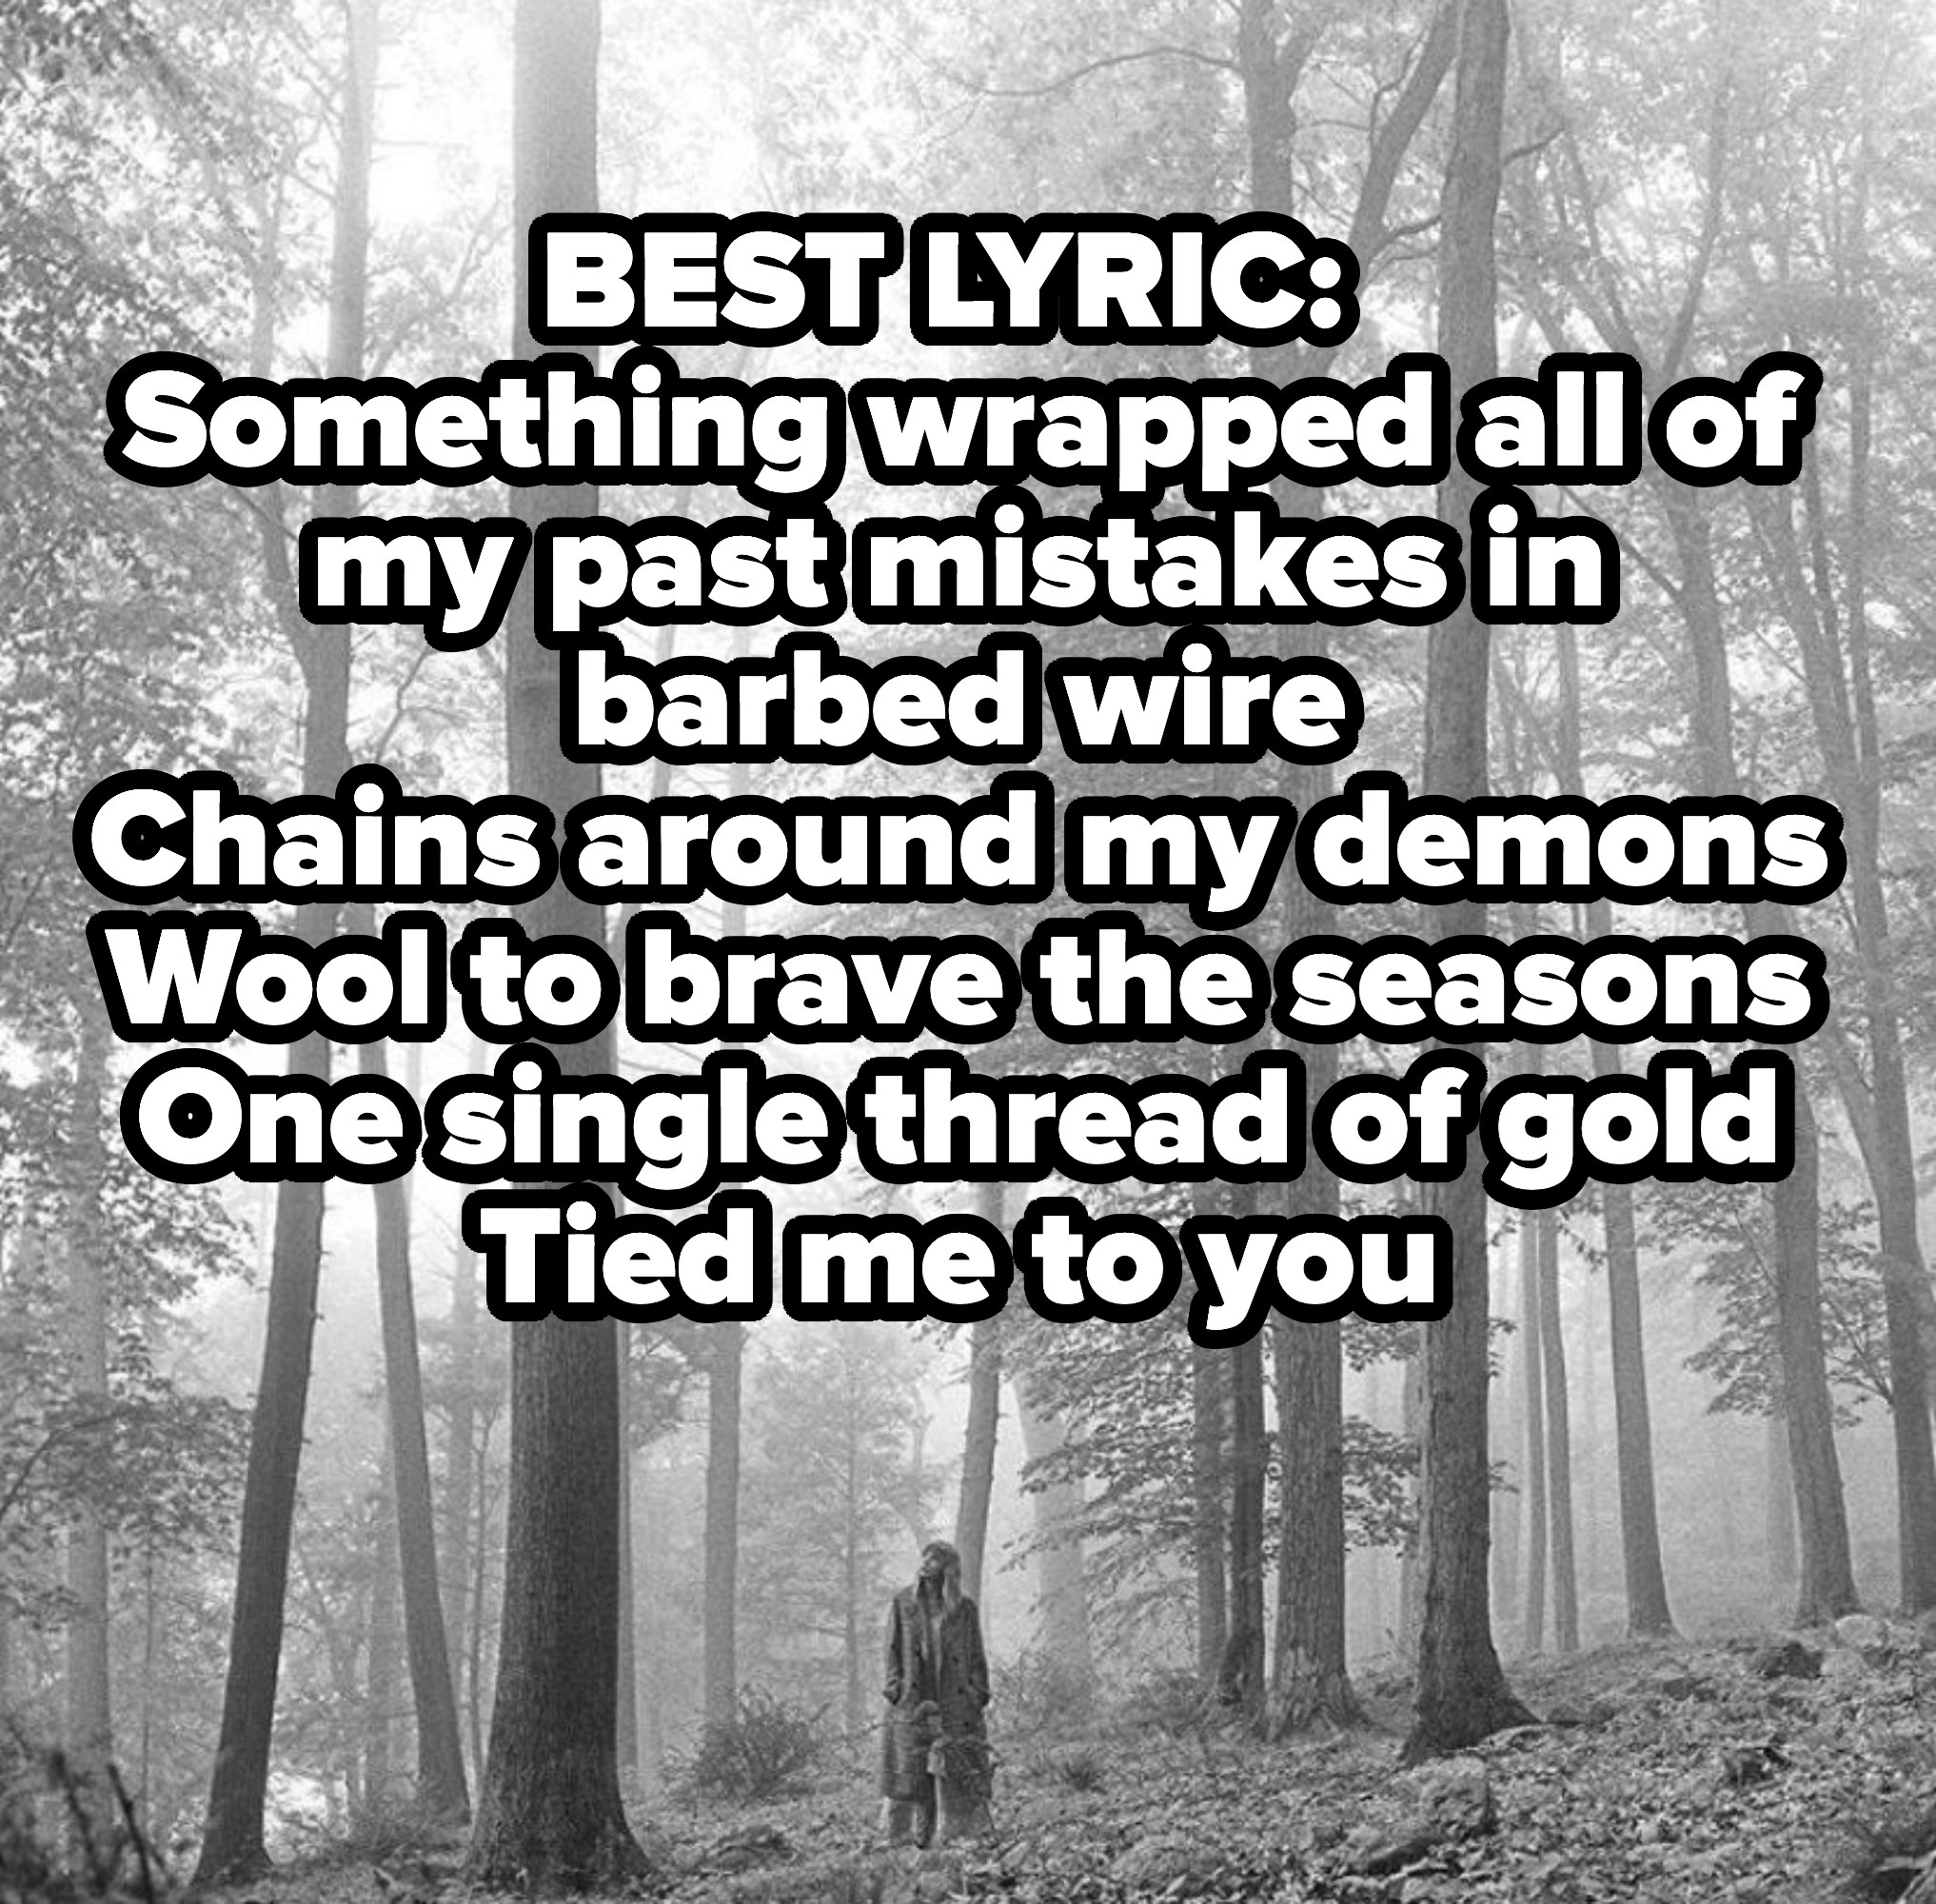 BEST LYRIC: Something wrapped all of my past mistakes in barbed wire
Chains around my demons
Wool to brave the seasons
One single thread of gold
Tied me to you